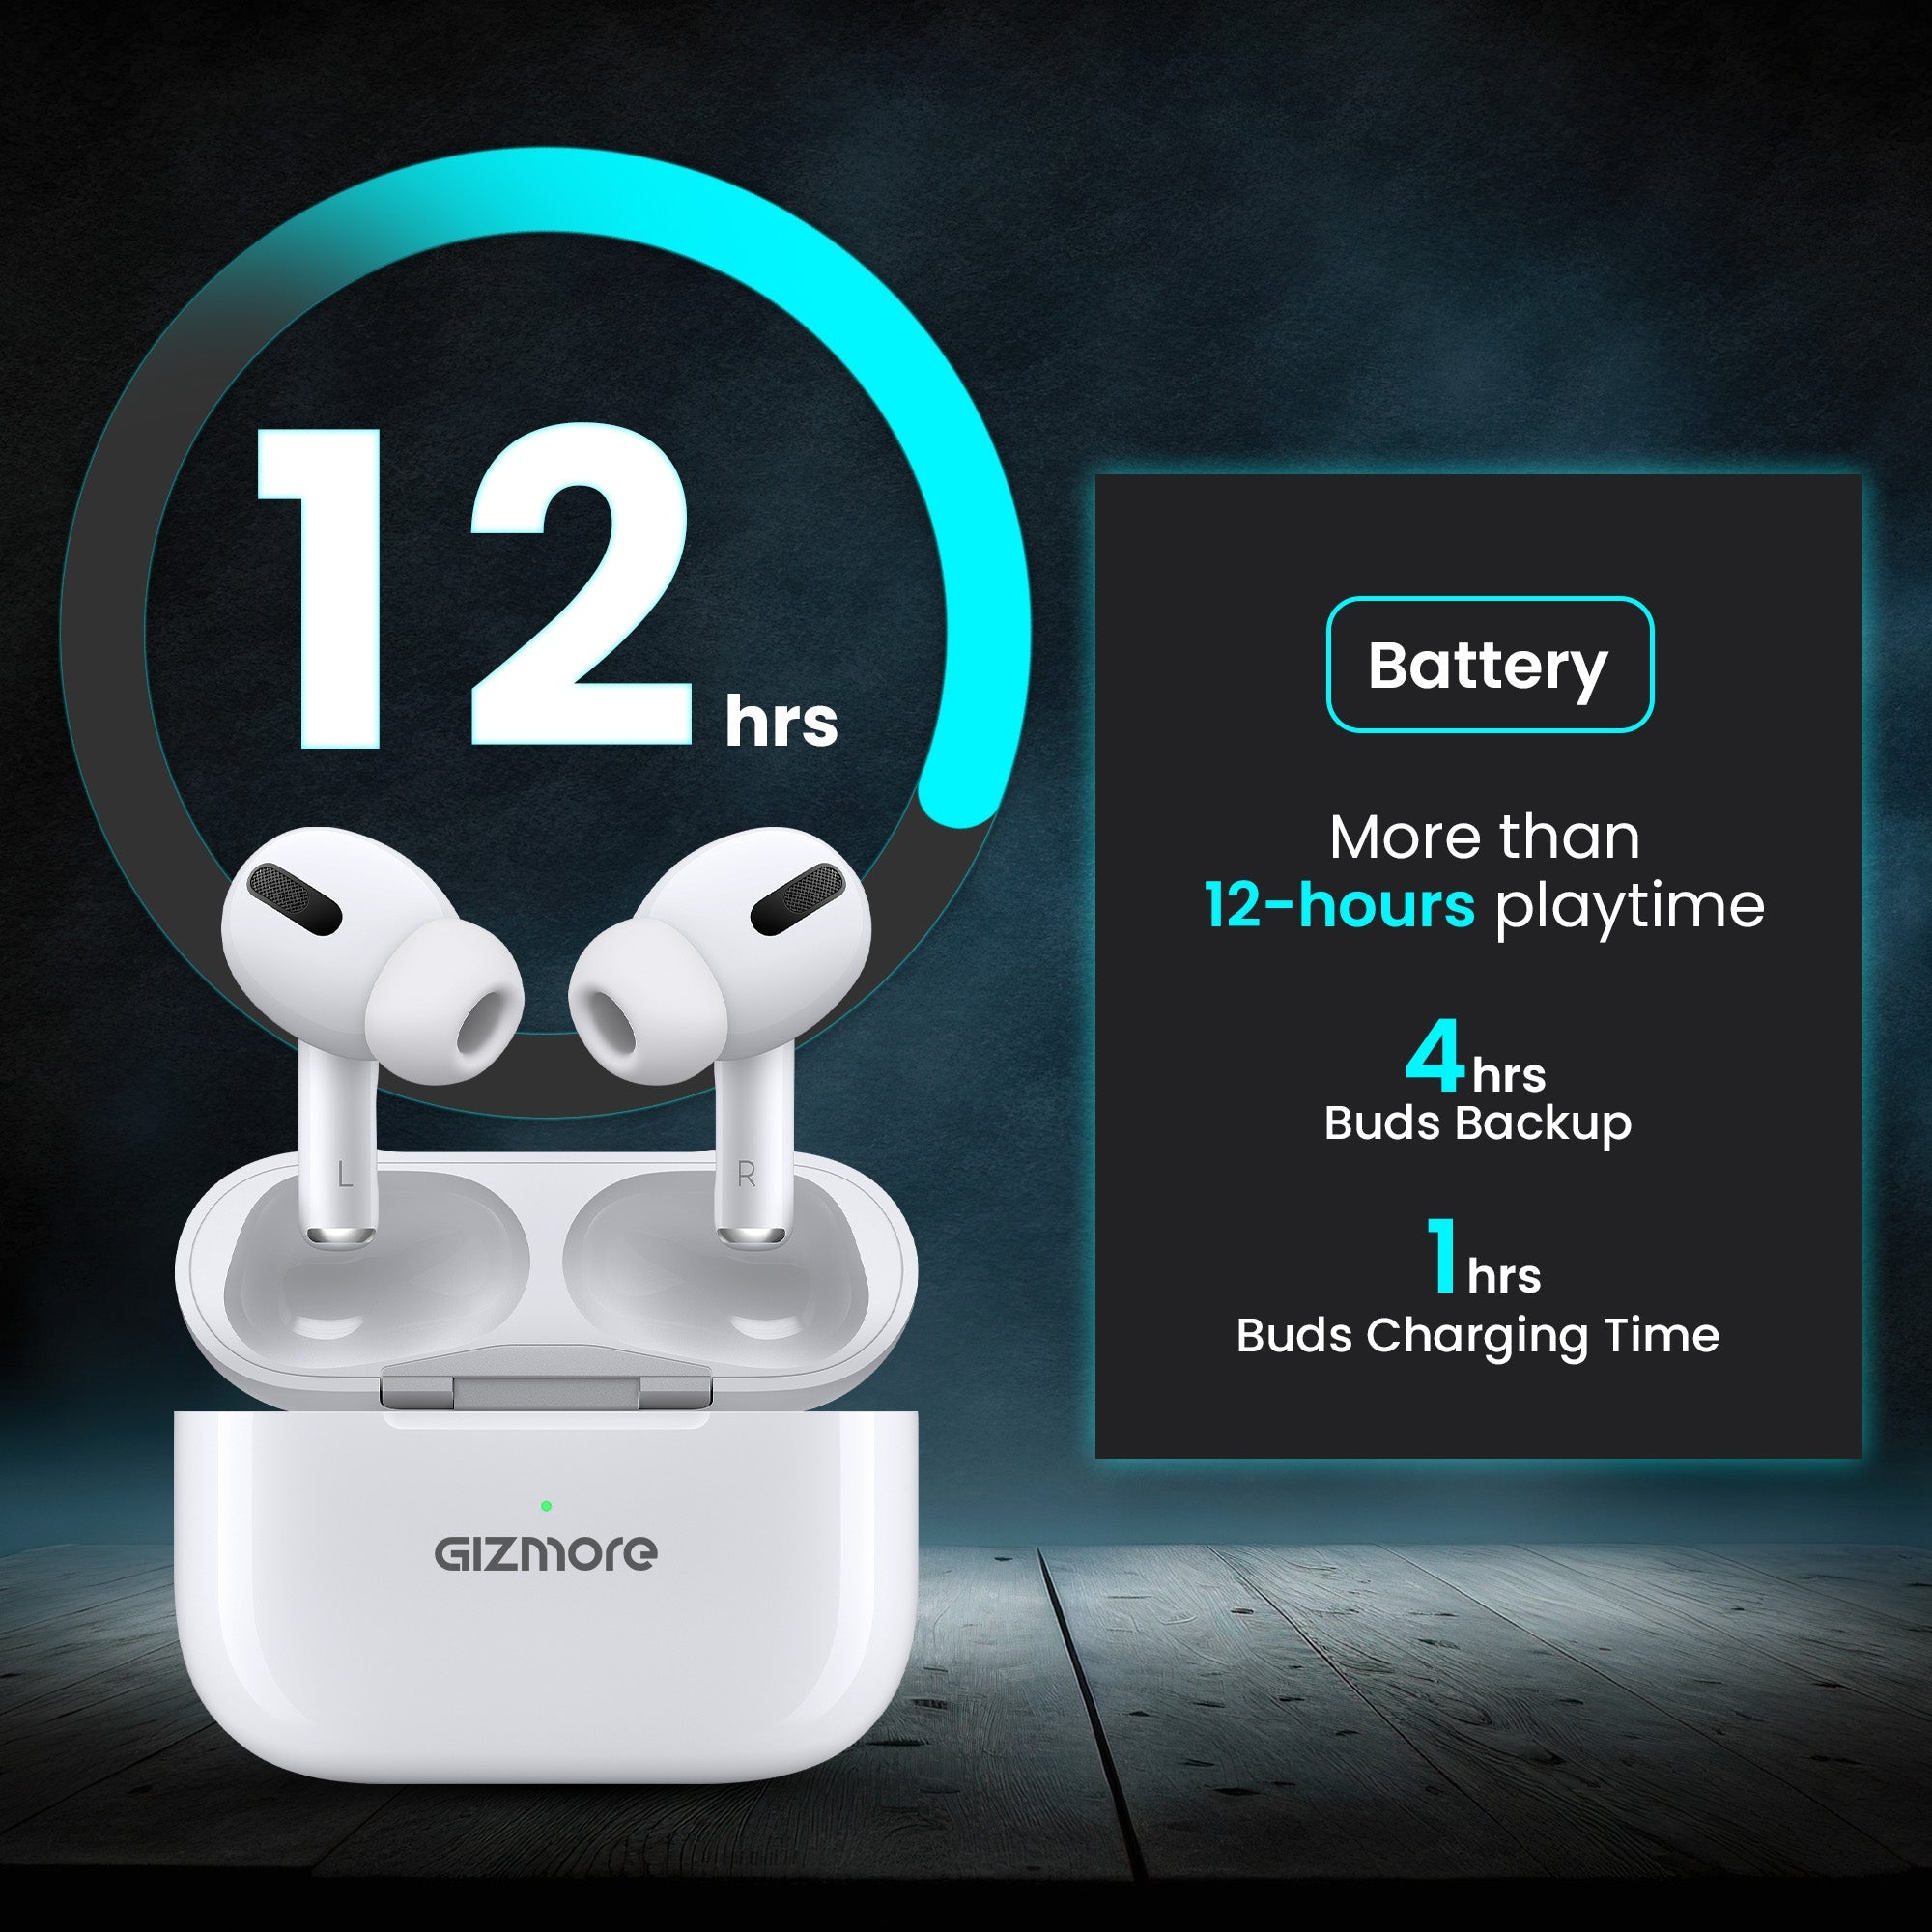 GIZMORE 862 | TWS In-Ear Earbuds Type-C Fast Charging with 12 Hours Playtime & Bluetooth V5.0|13mm Bass Drivers| Sweat & Water Resistant | Touch Controls & Voice Assistant Earbuds (White)